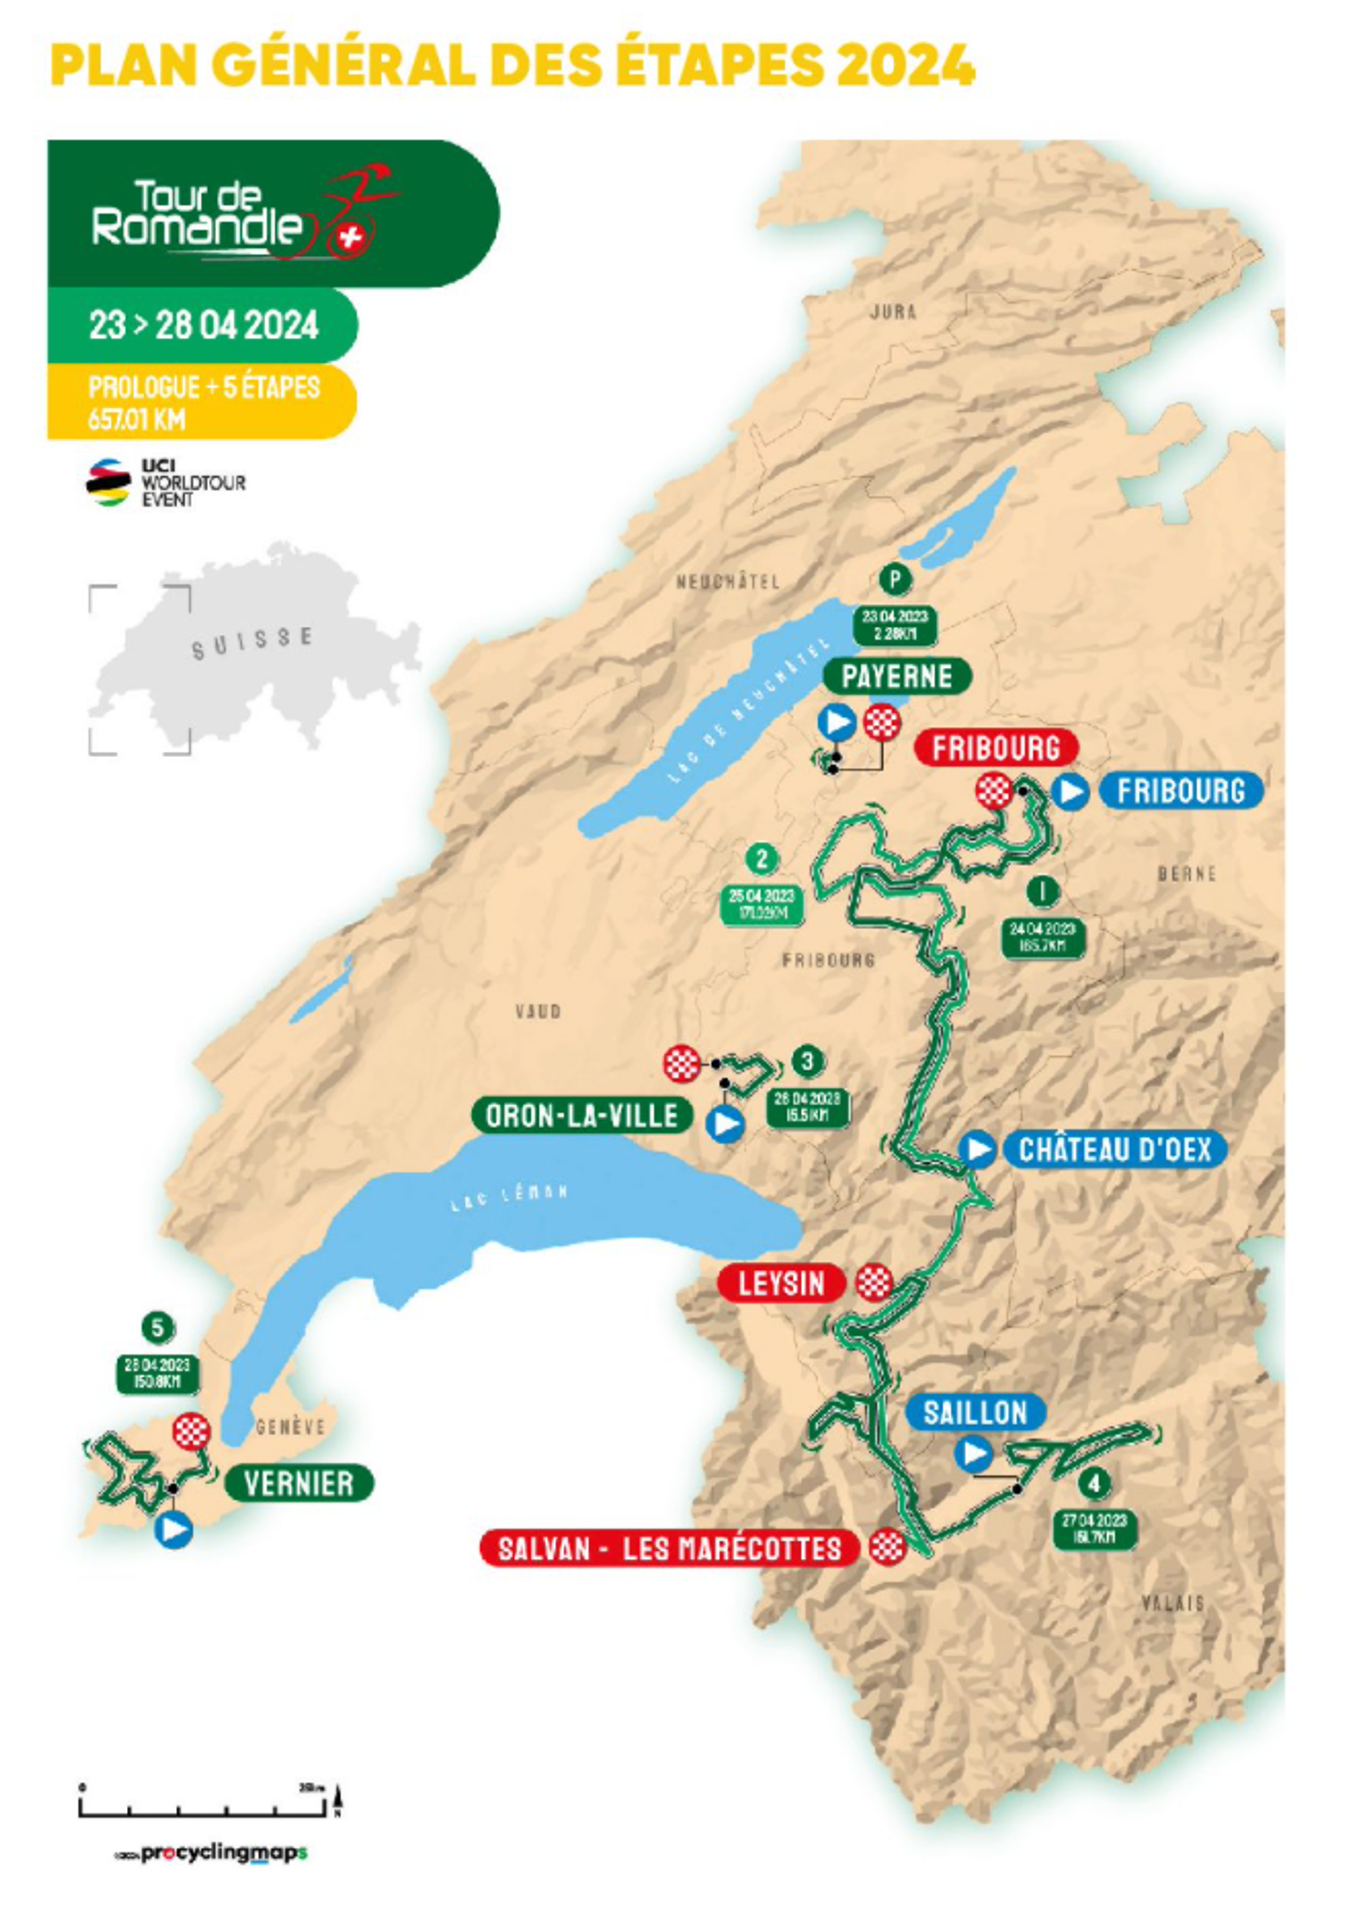 An overview of this year's Tour de Romandie